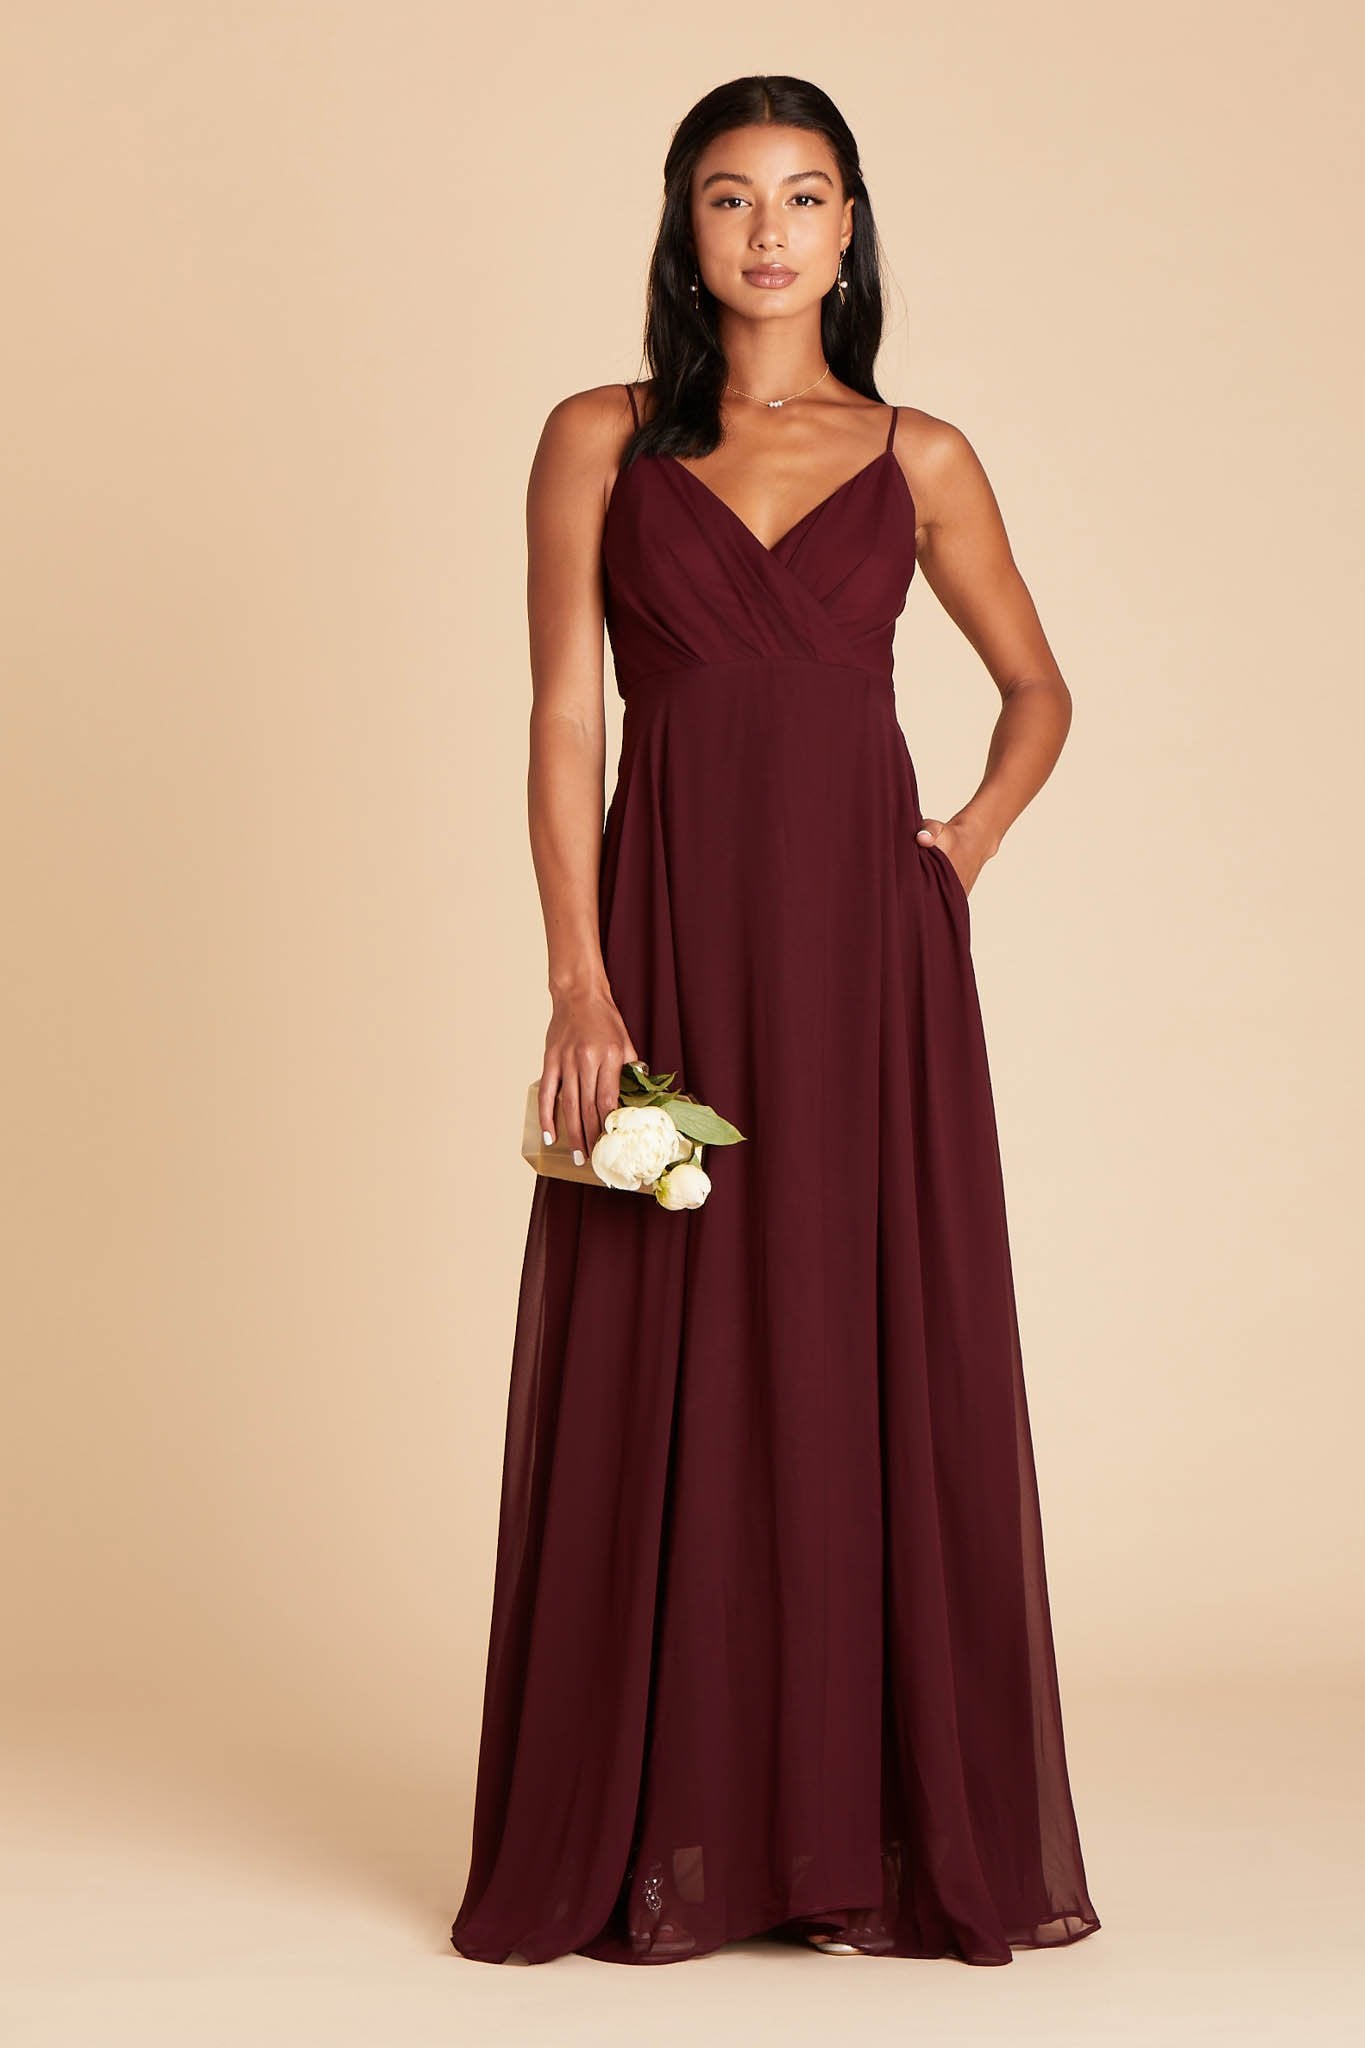 Kaia bridesmaids dress in cabernet burgundy chiffon by Birdy Grey, front view with hand in pocket